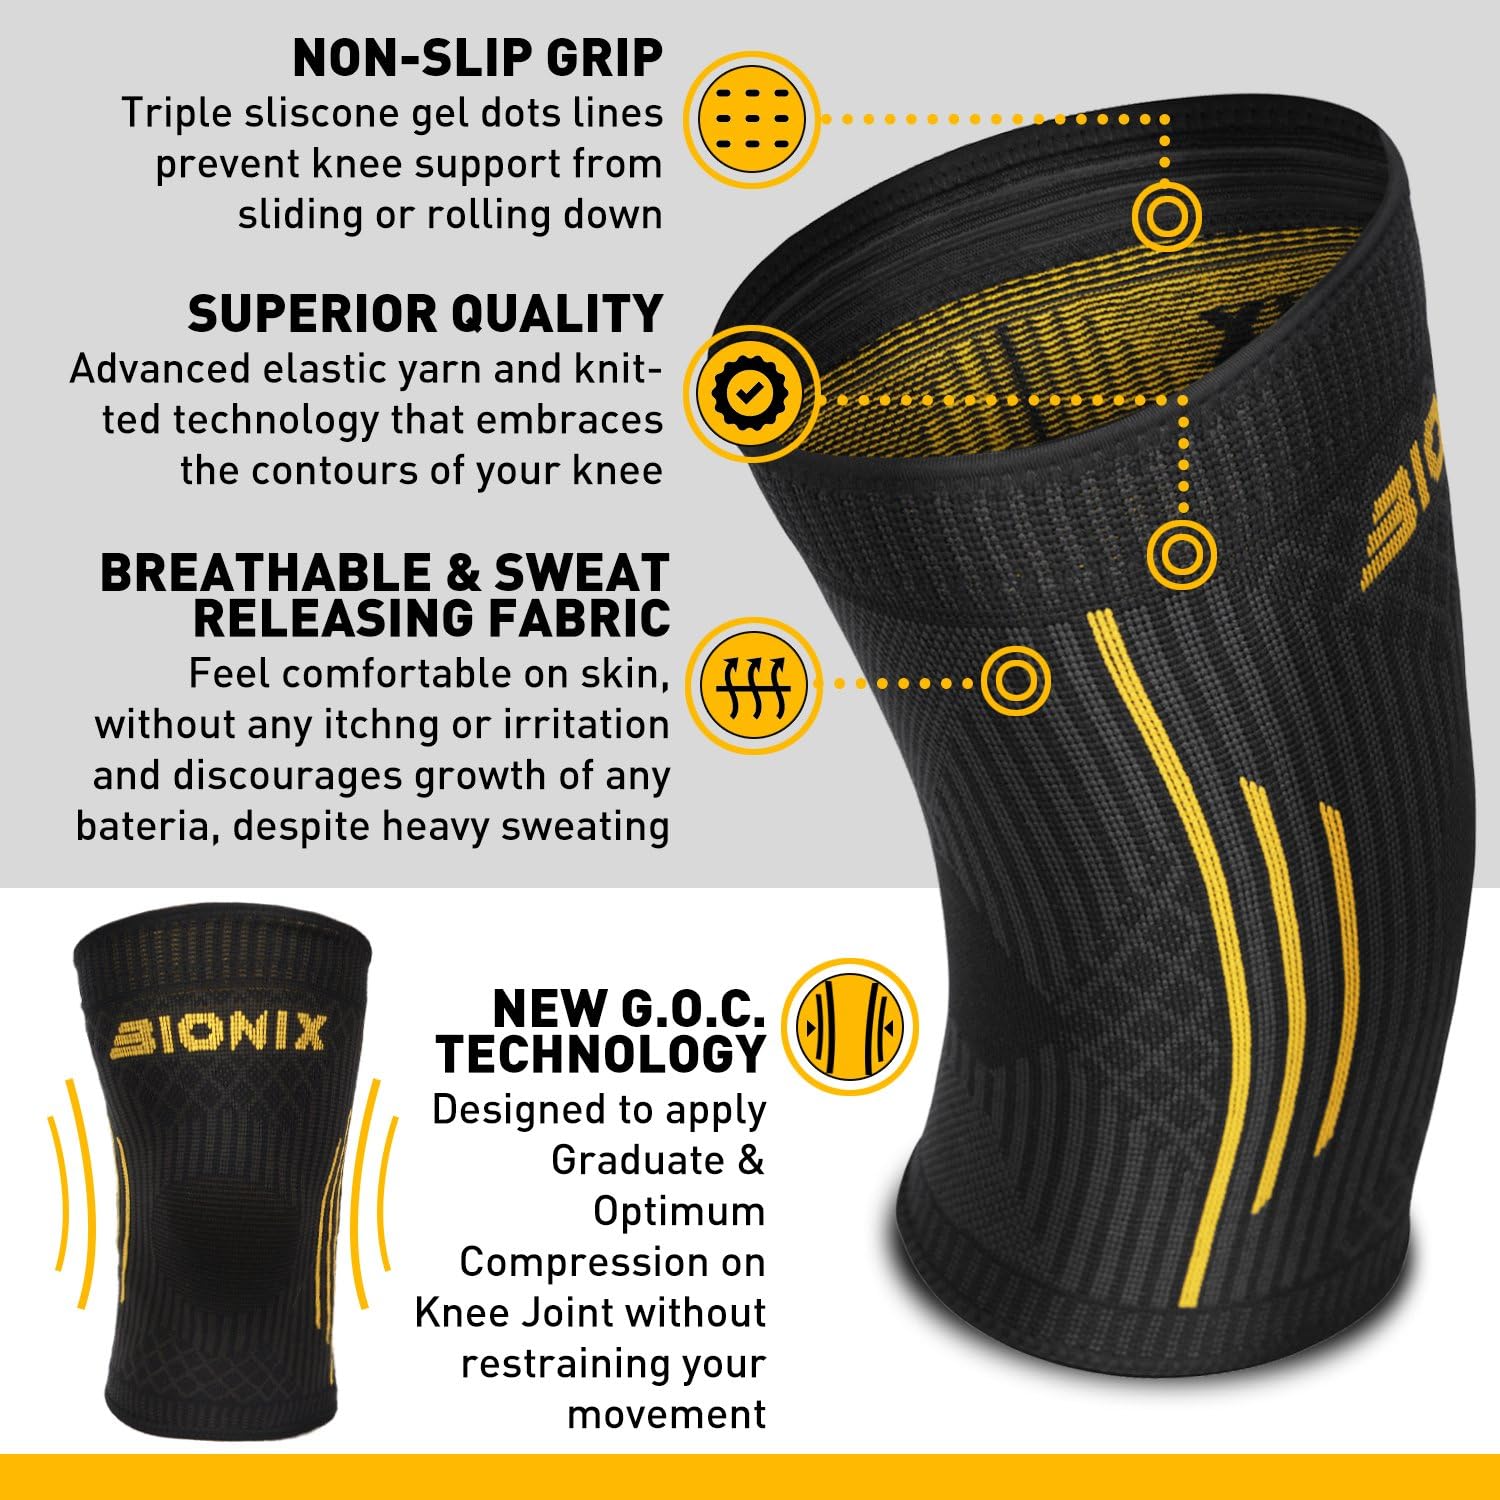 Bionix Knee Support Brace Compression Sleeve,Product details.